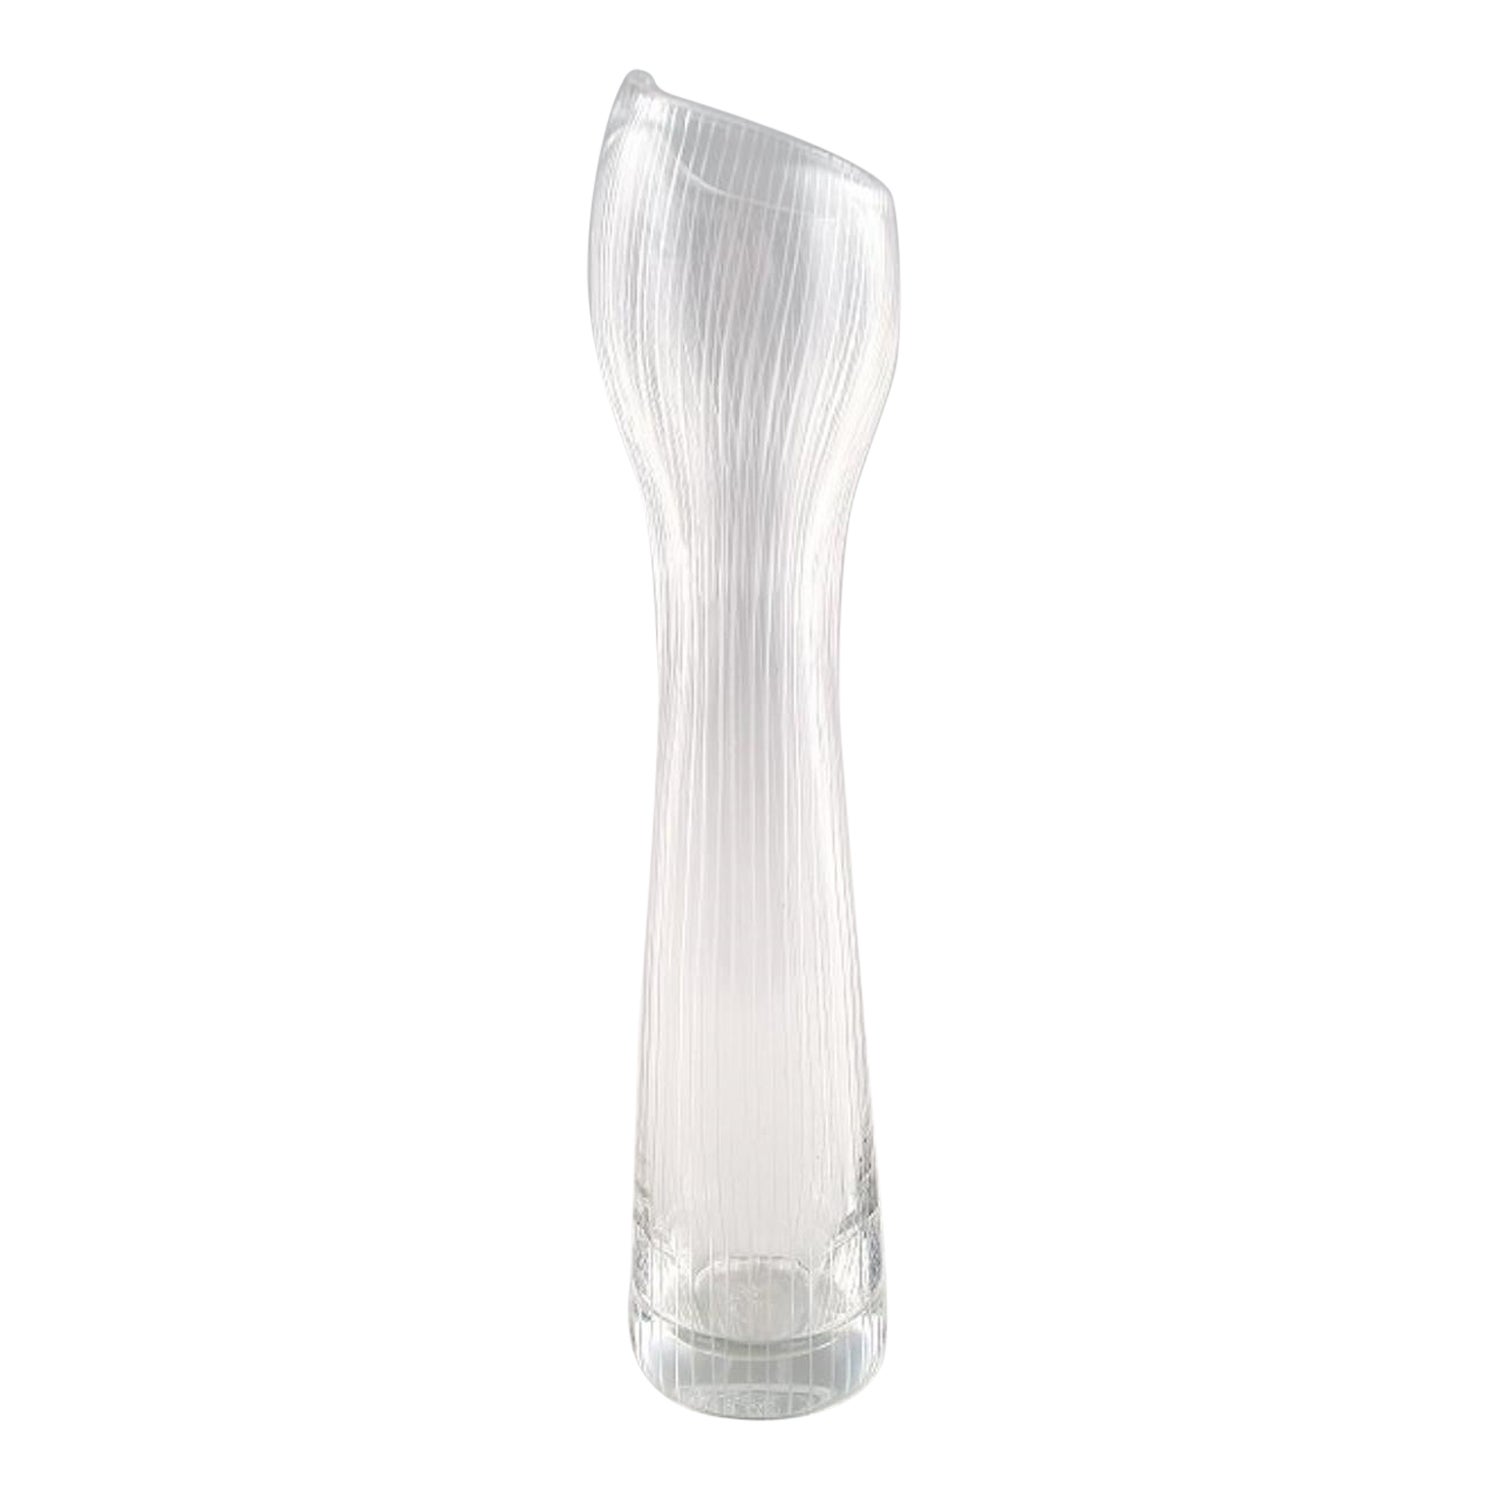 Tapio Wirkkala for Iittala, Clear Art Glass Vase with Engraved Decoration, 1957 For Sale